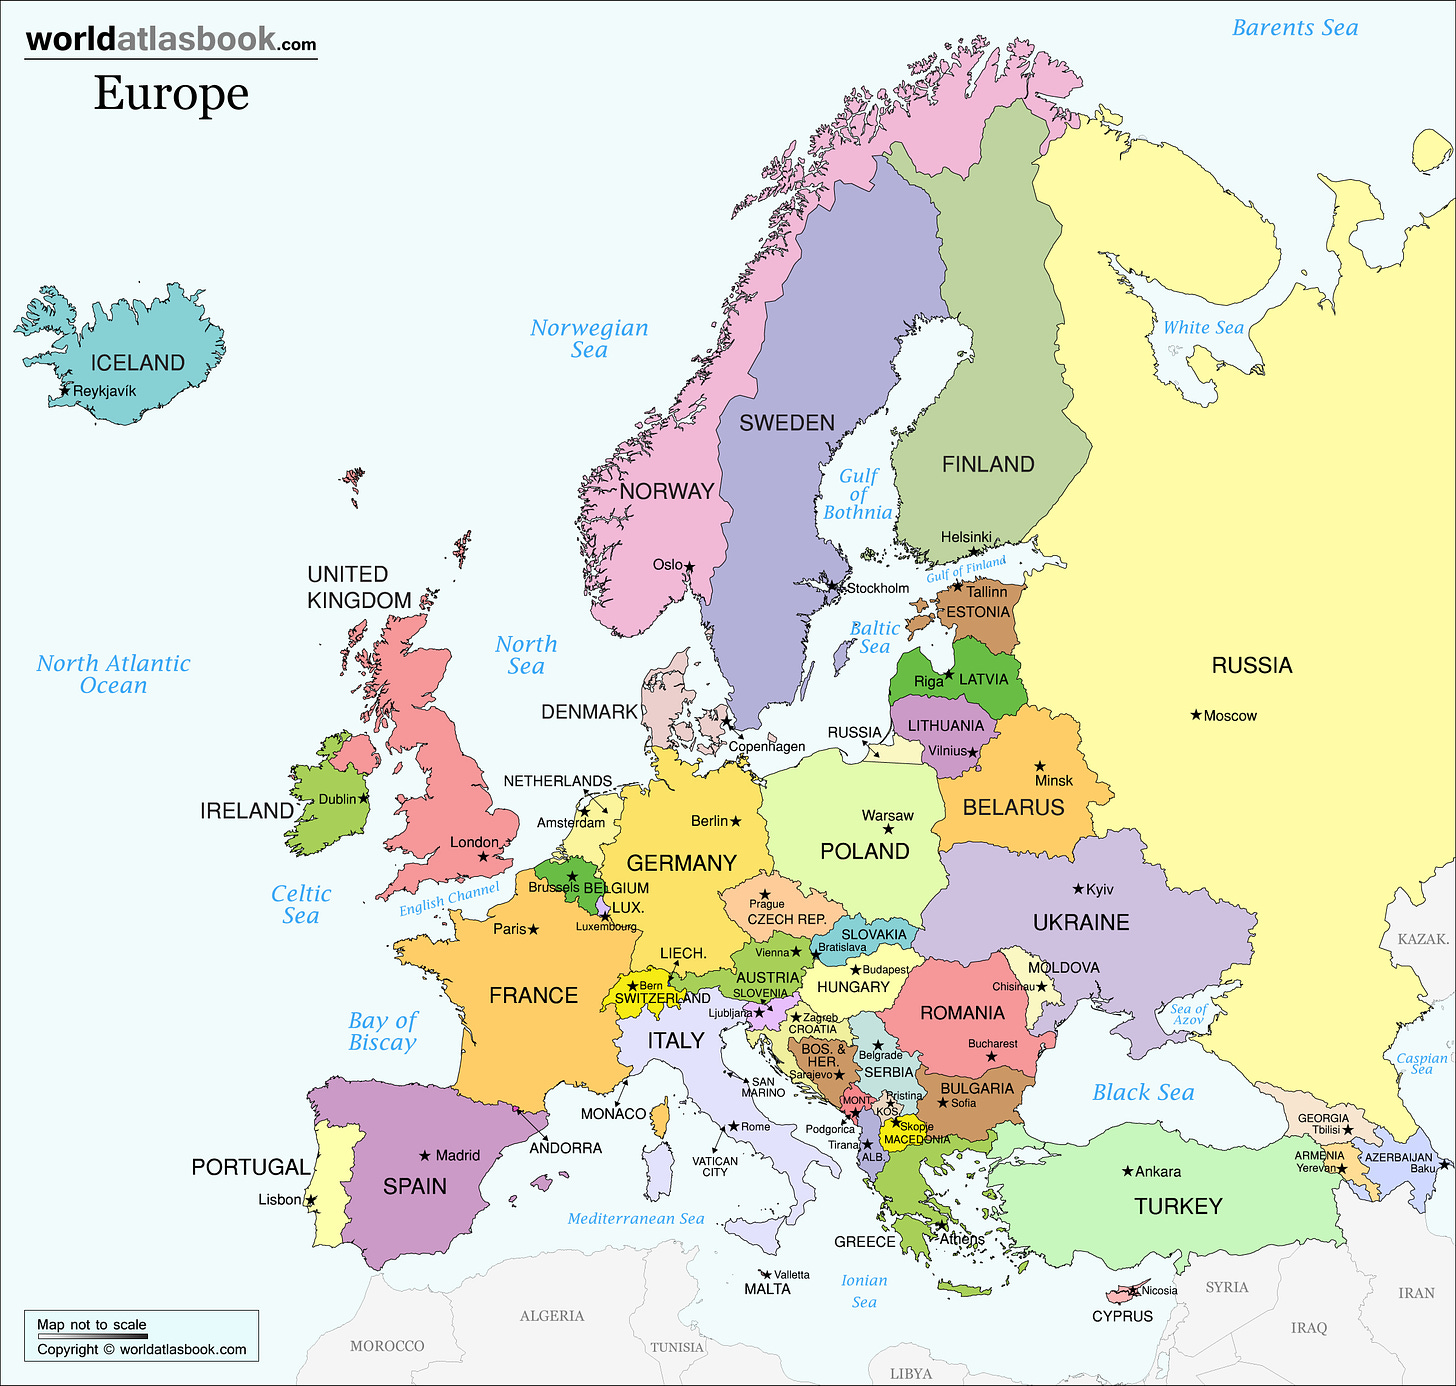 Map of Ugly Borders of Europe’s Ethnolinguistic Nations